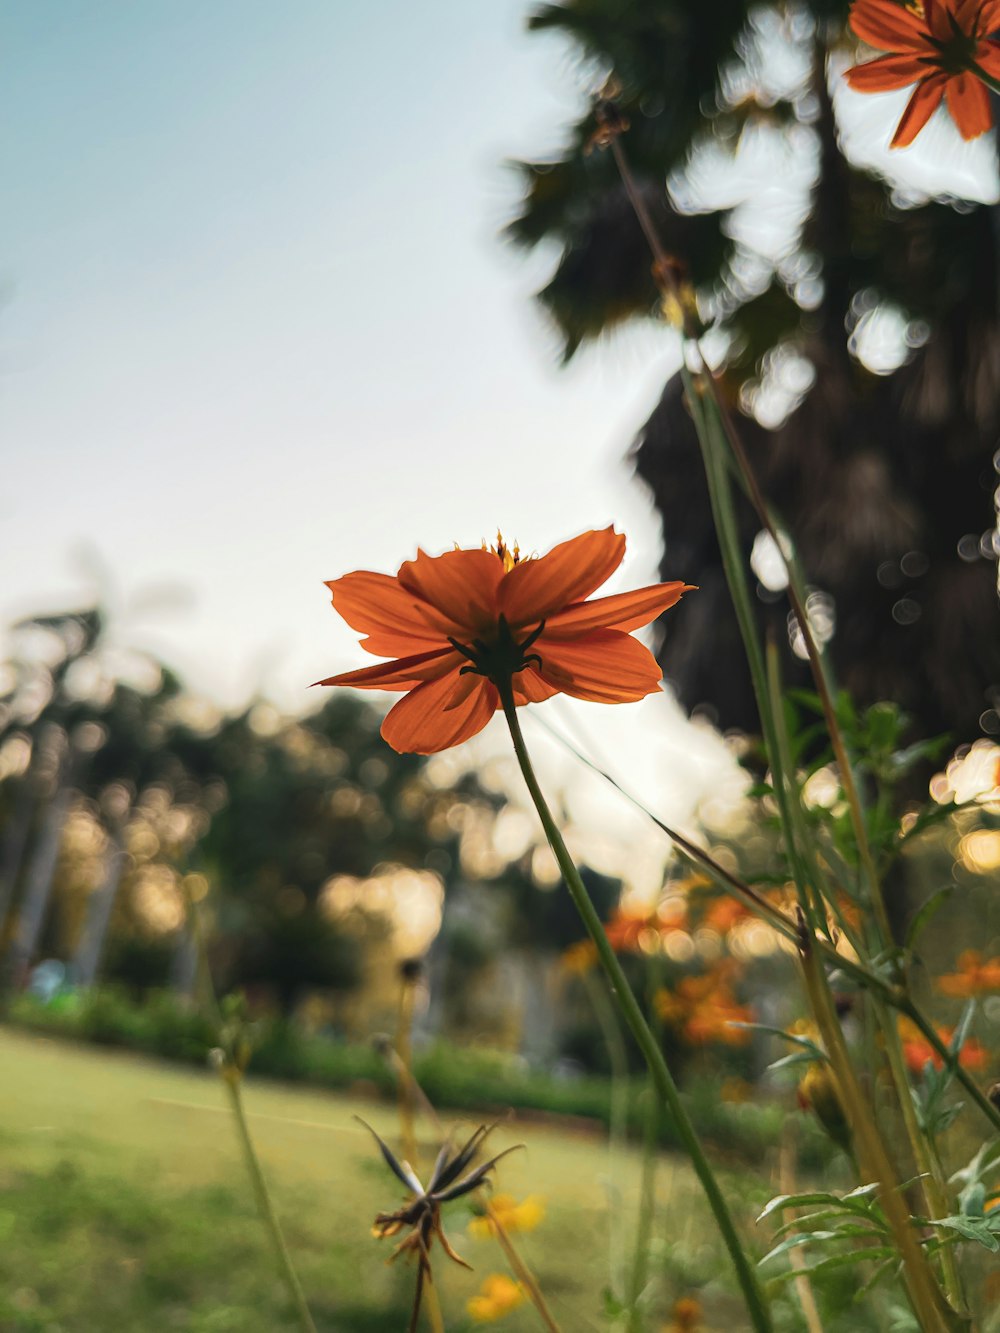 some orange flowers in a grassy area with trees in the background